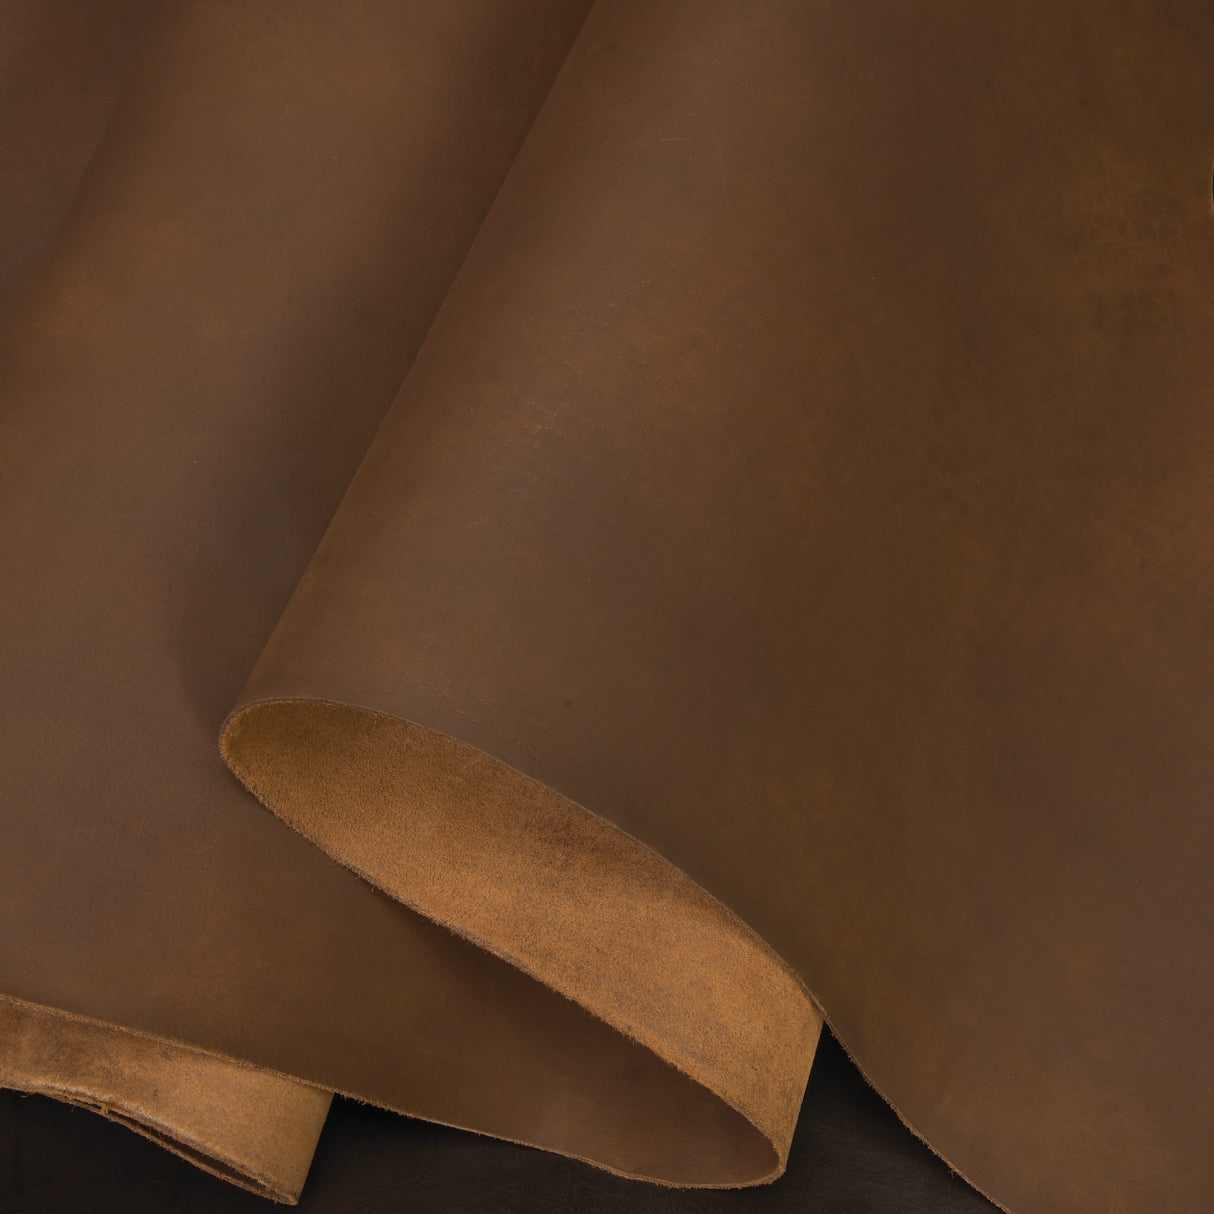 Sample, Matte Chrome Tanned Water Buffalo Leather, 5-6 oz., Bark Brown